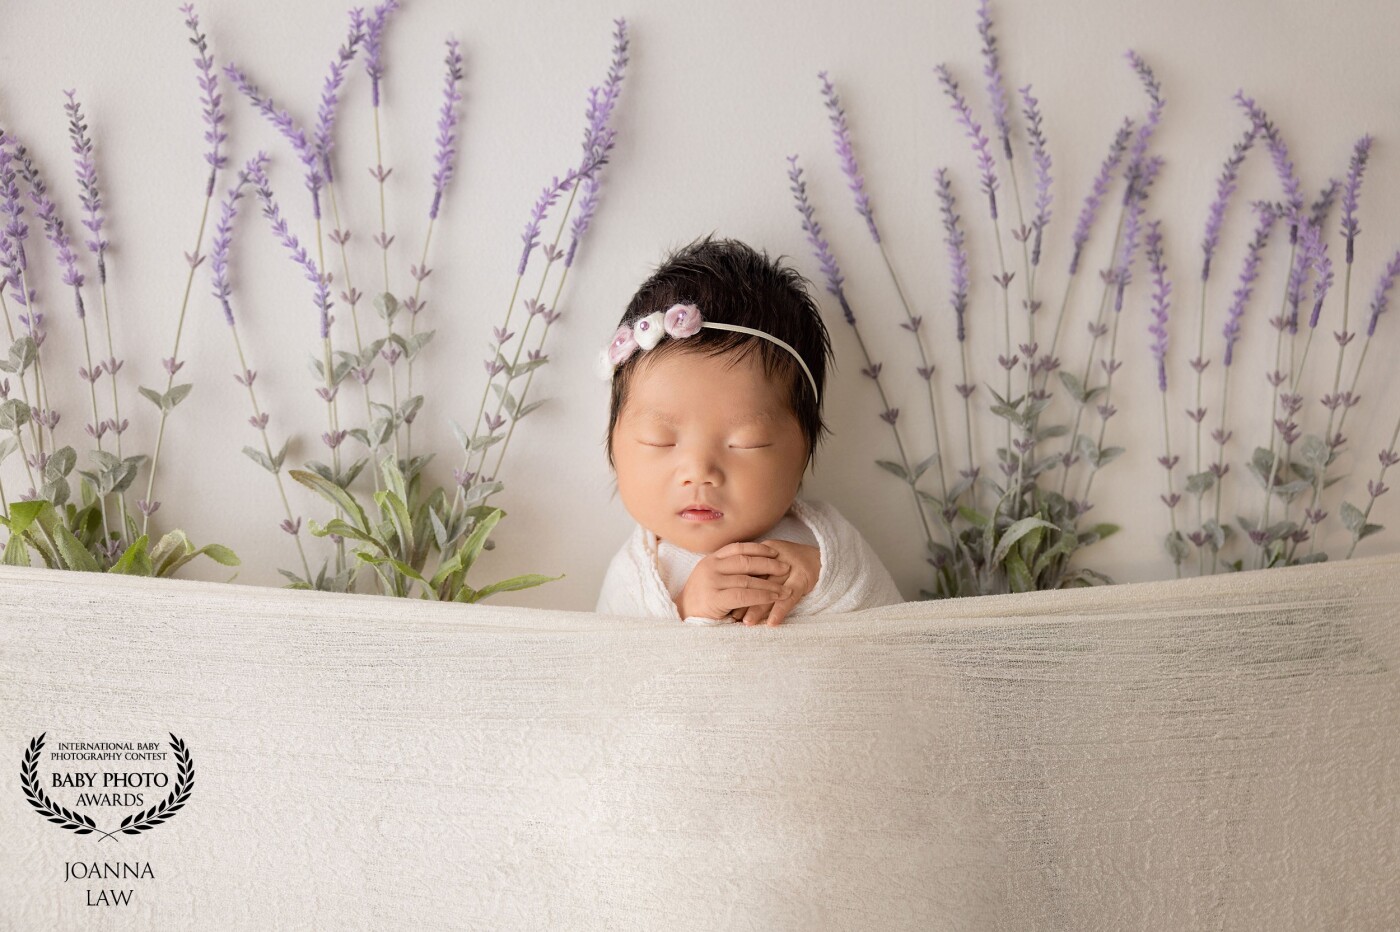 "Baby in lavender company" is what I would title this portriat.  This beautiful baby girl's mama asked if we could use flowers and add a pop of color to her session but didn't want over the top flowers. Lavender was the prefect choice.  This turned out to be ours and mom's favorite choice from this baby girl's gallery.